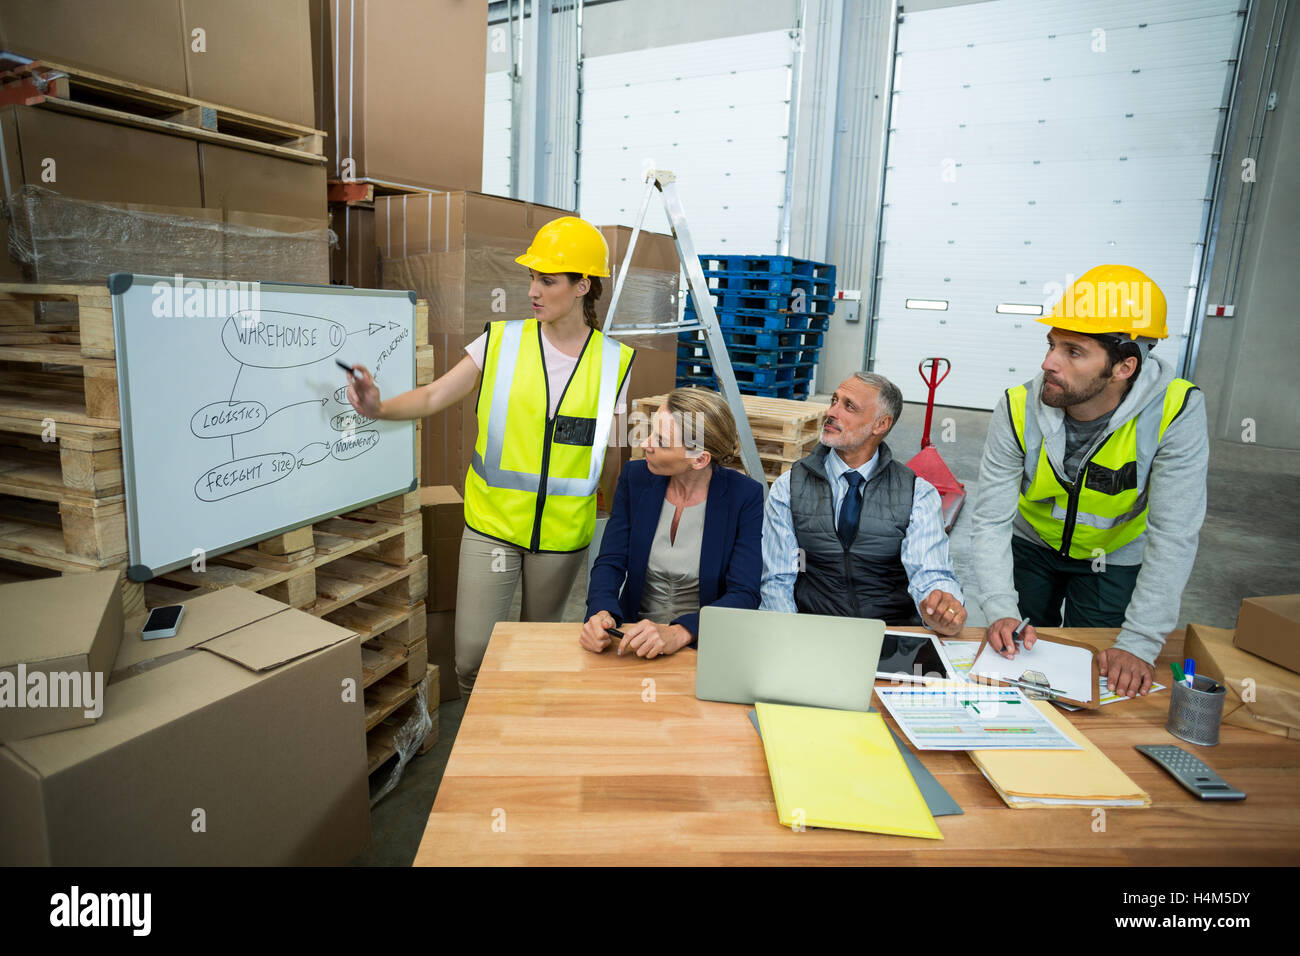 Warehouse workers and managers discussing plan on whiteboard Stock Photo